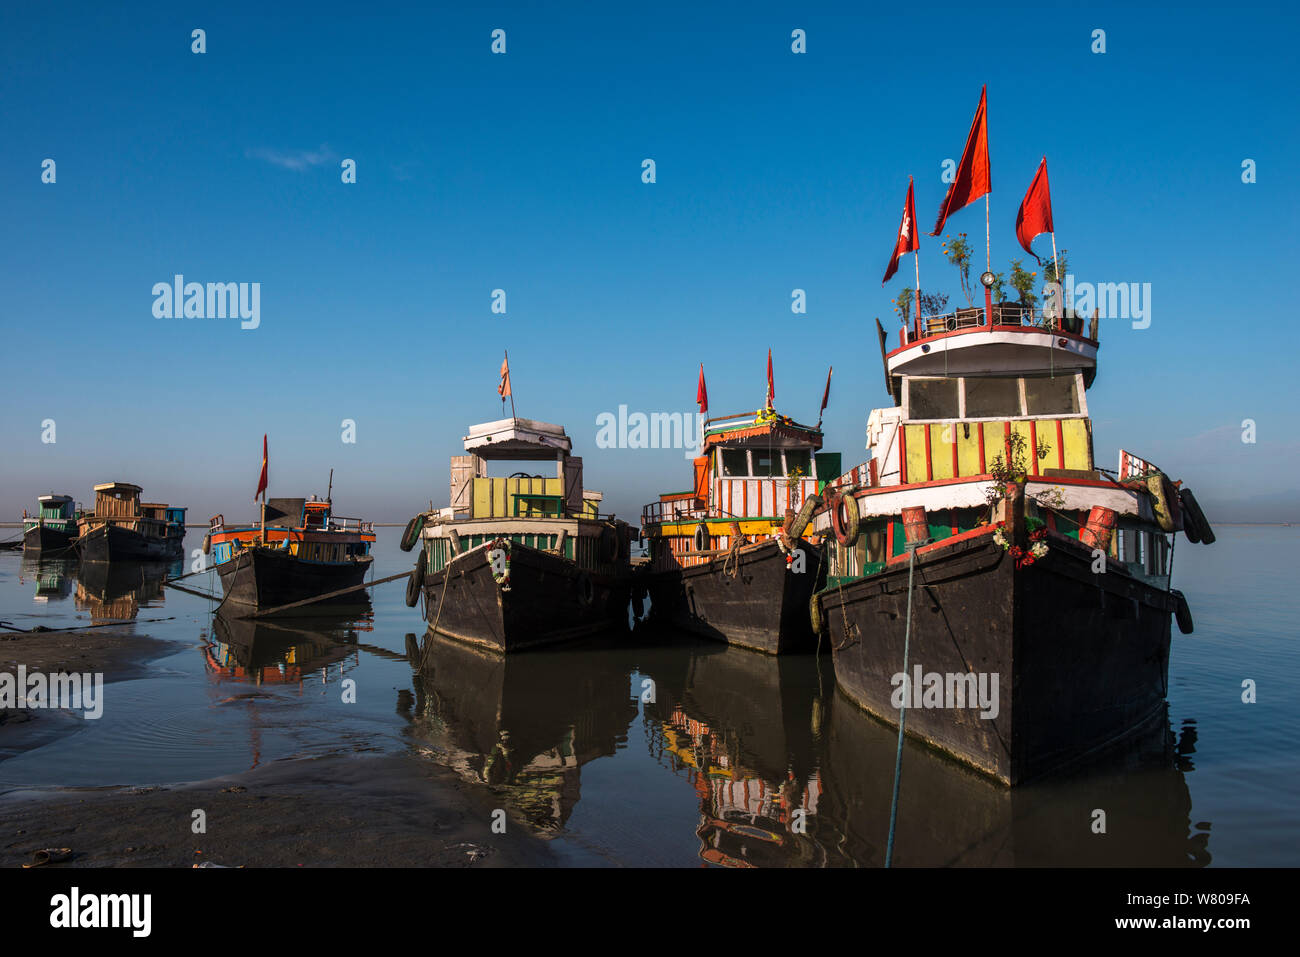 Ferries on Brahmaputra River, Assam, North East India, October 2014. Stock Photo